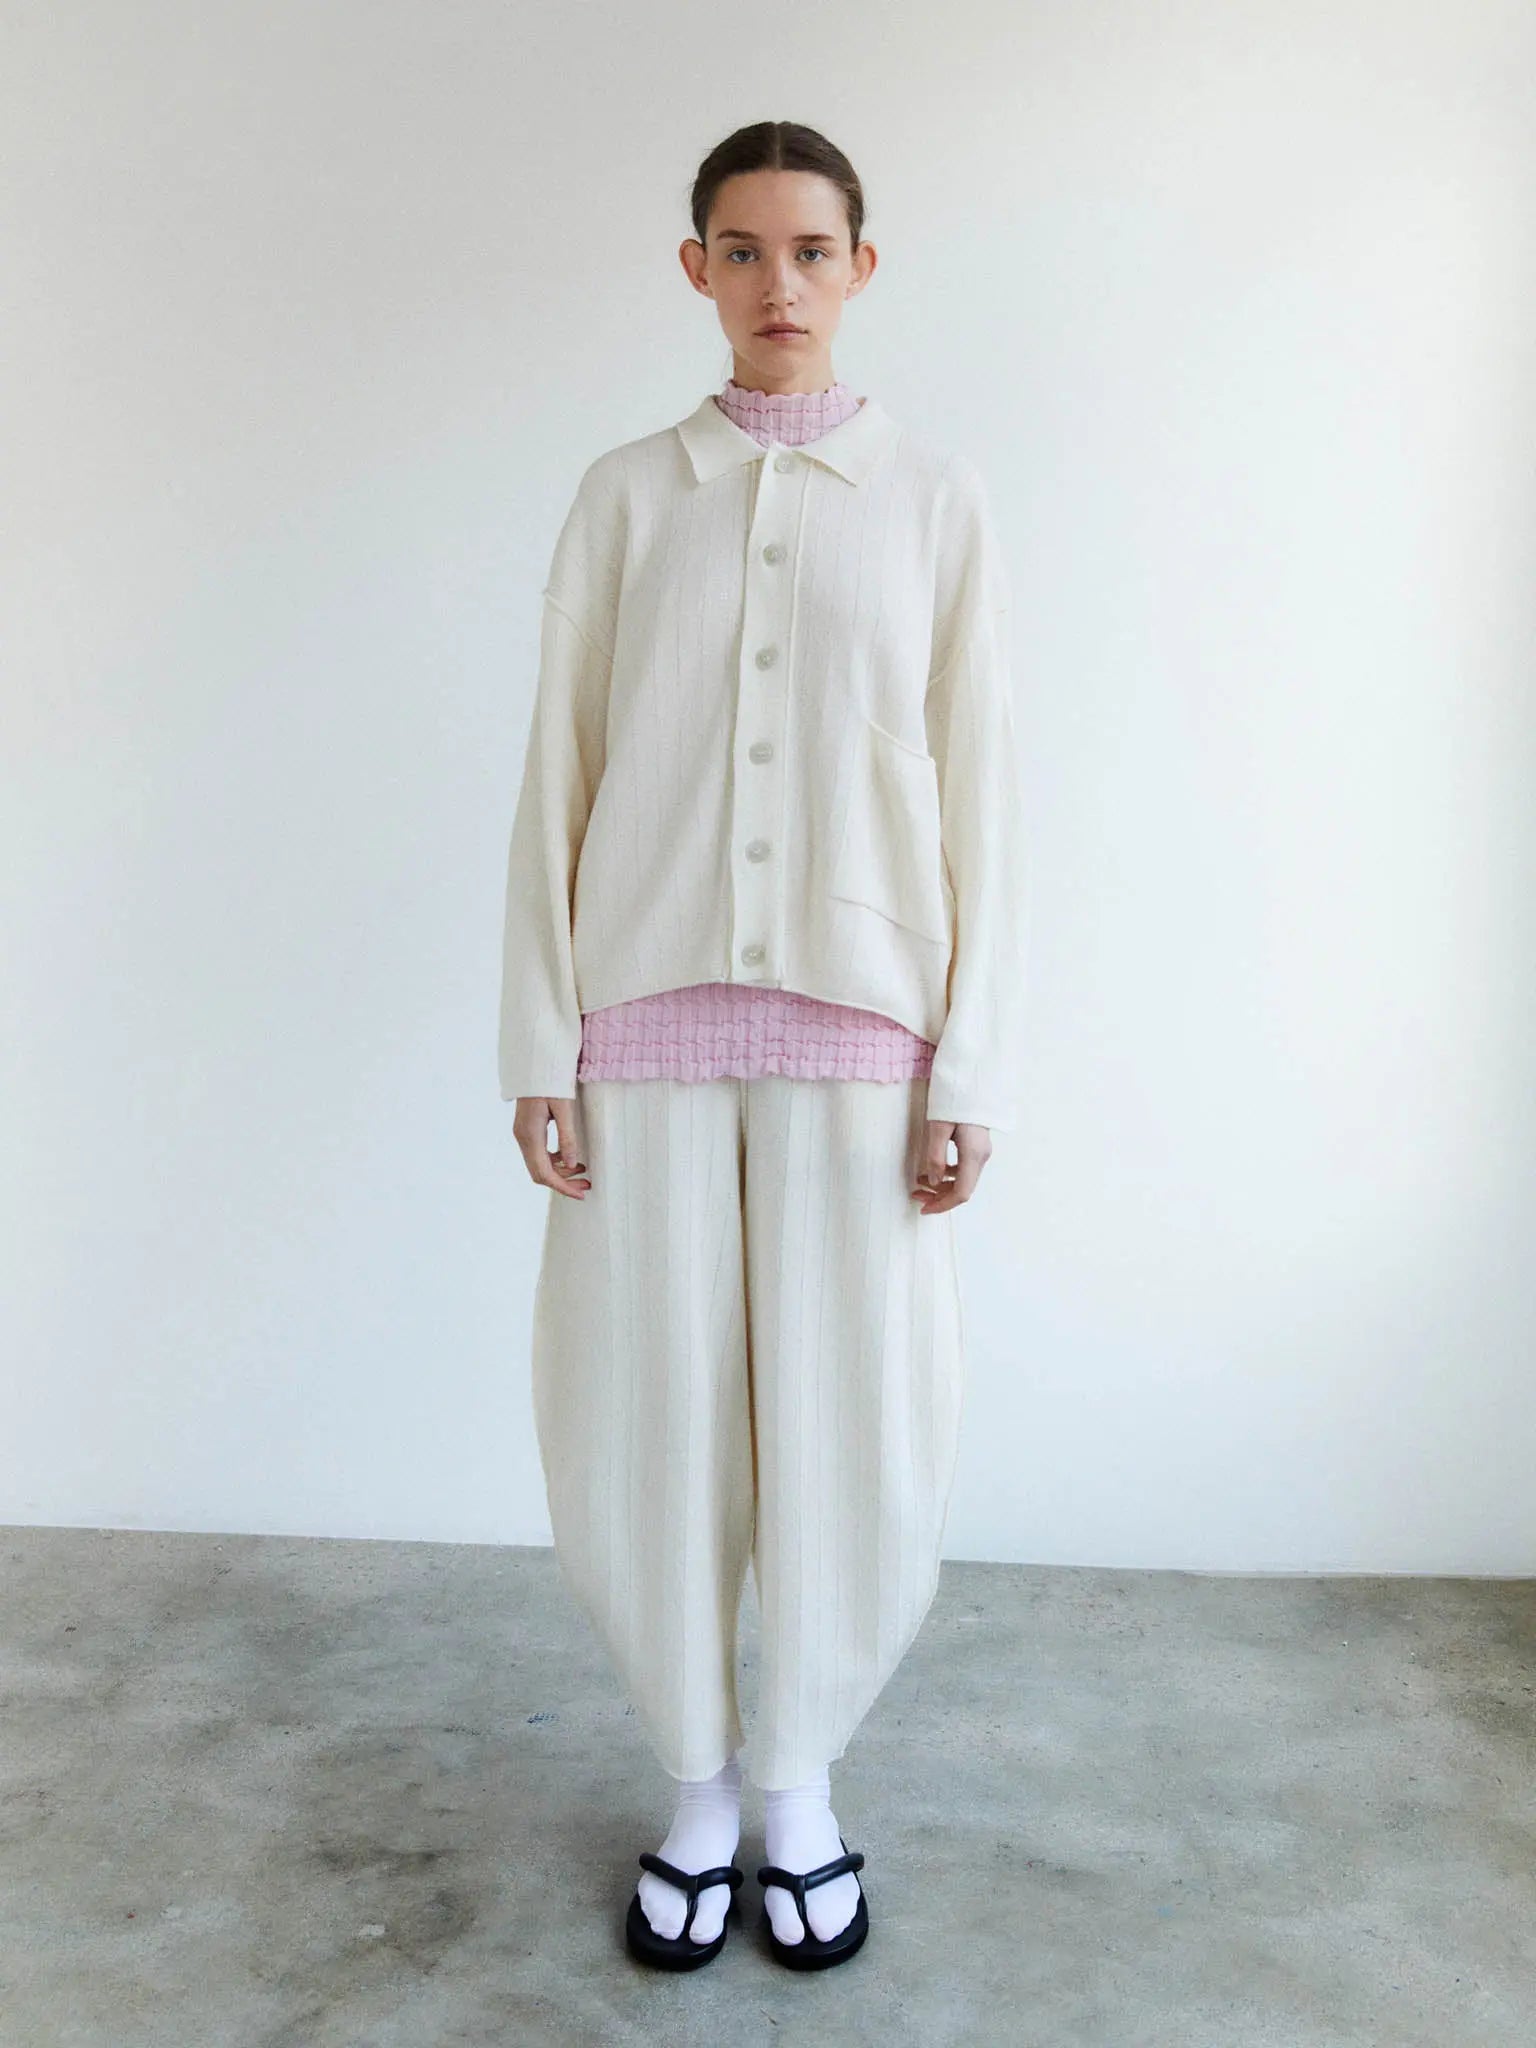 A cream-colored, long-sleeve button-up cardigan with a ribbed texture. It features a collar, front buttons, and a single large pocket on the left side. The label inside the neckline reads "Rus." Laid flat against a plain white background, this stylish piece is available at Bassalstore in Barcelona. This is the Tobira Cardigan Chalk by Rus.